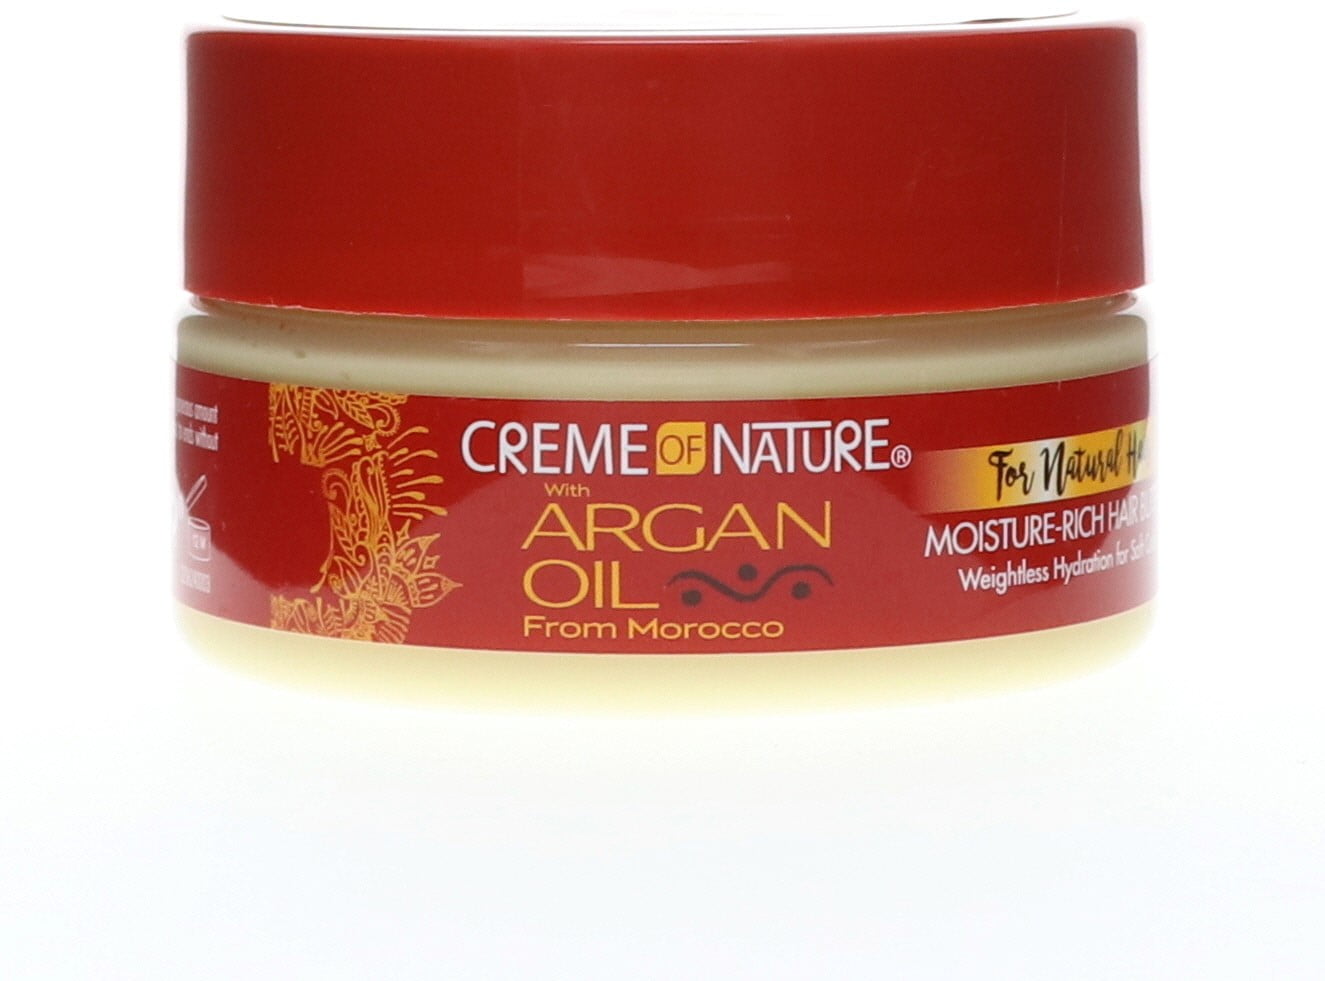 Creme of Nature Butter Blend & Flaxseed Stretch & Define Styling